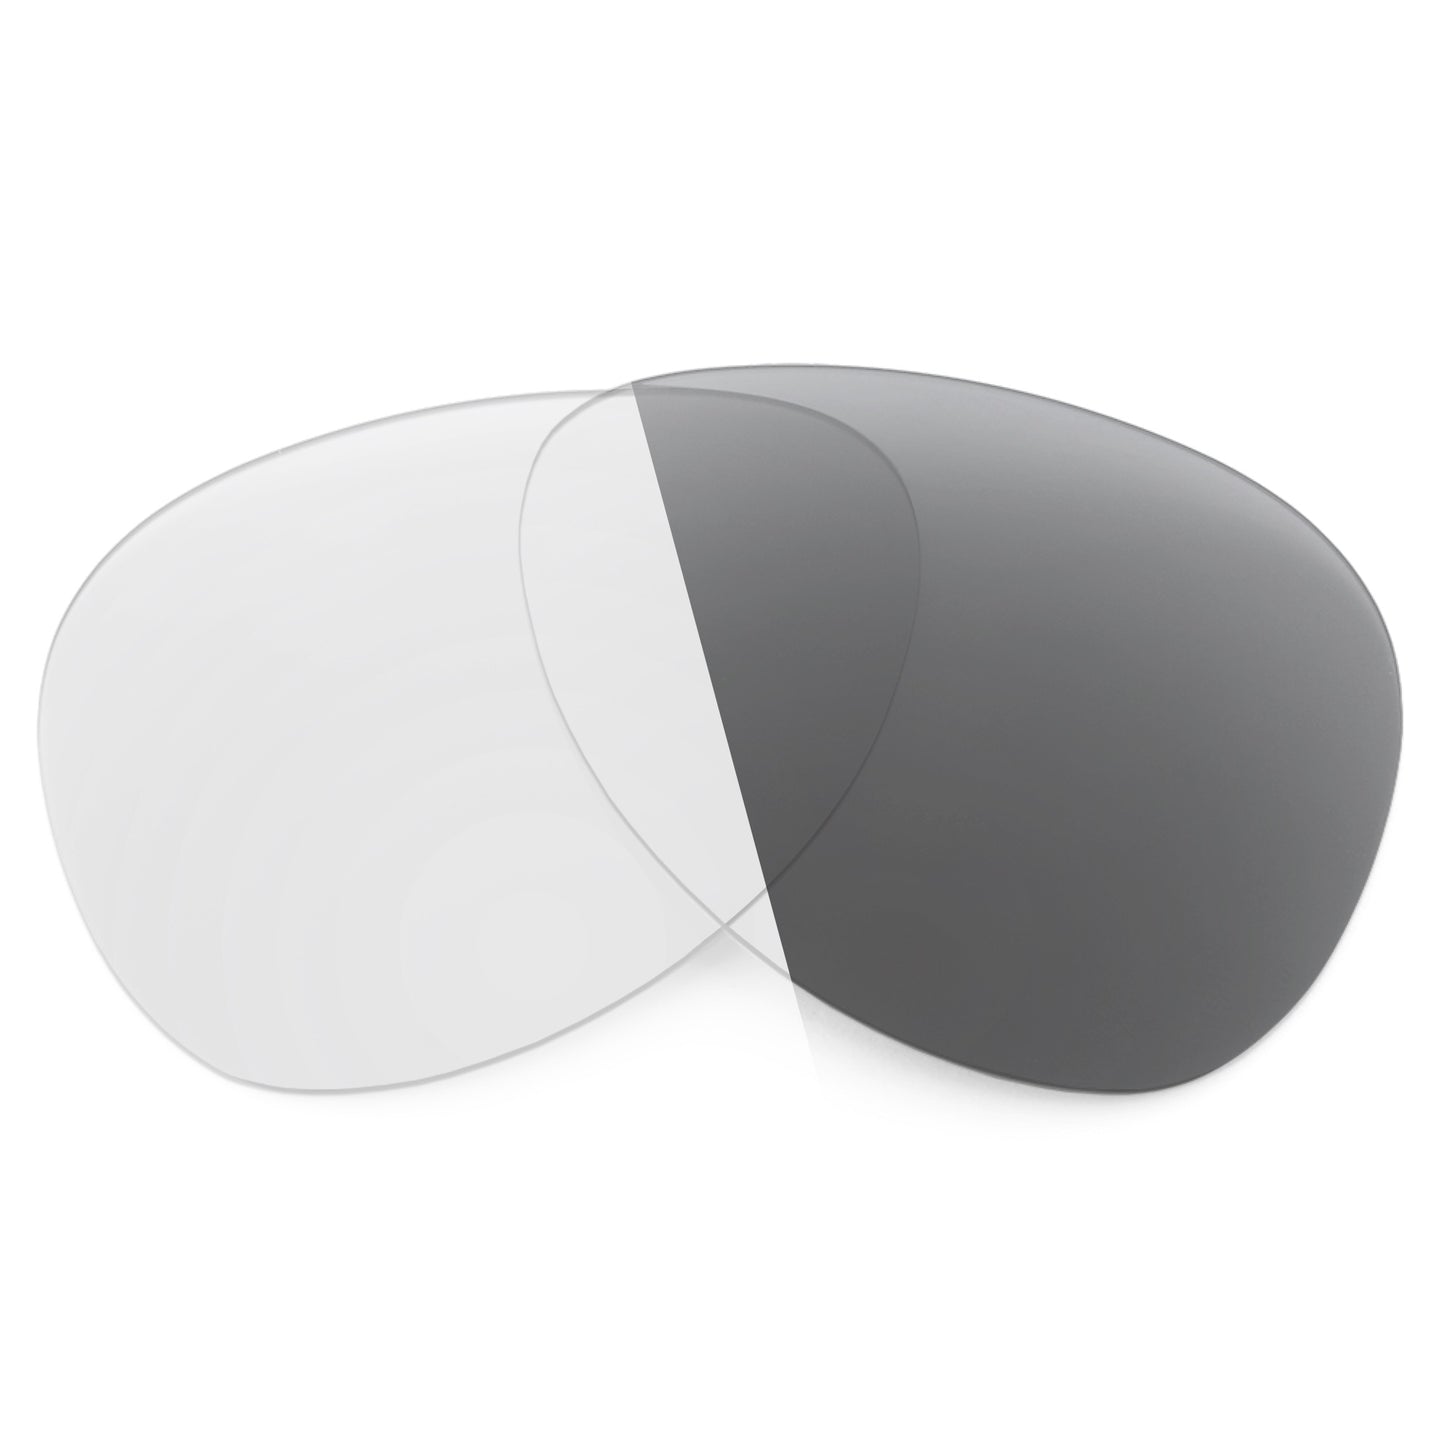 Revant replacement lenses for Ray-Ban Aviator Carbon Fibre RB8307 58mm Non-Polarized Adapt Gray Photochromic